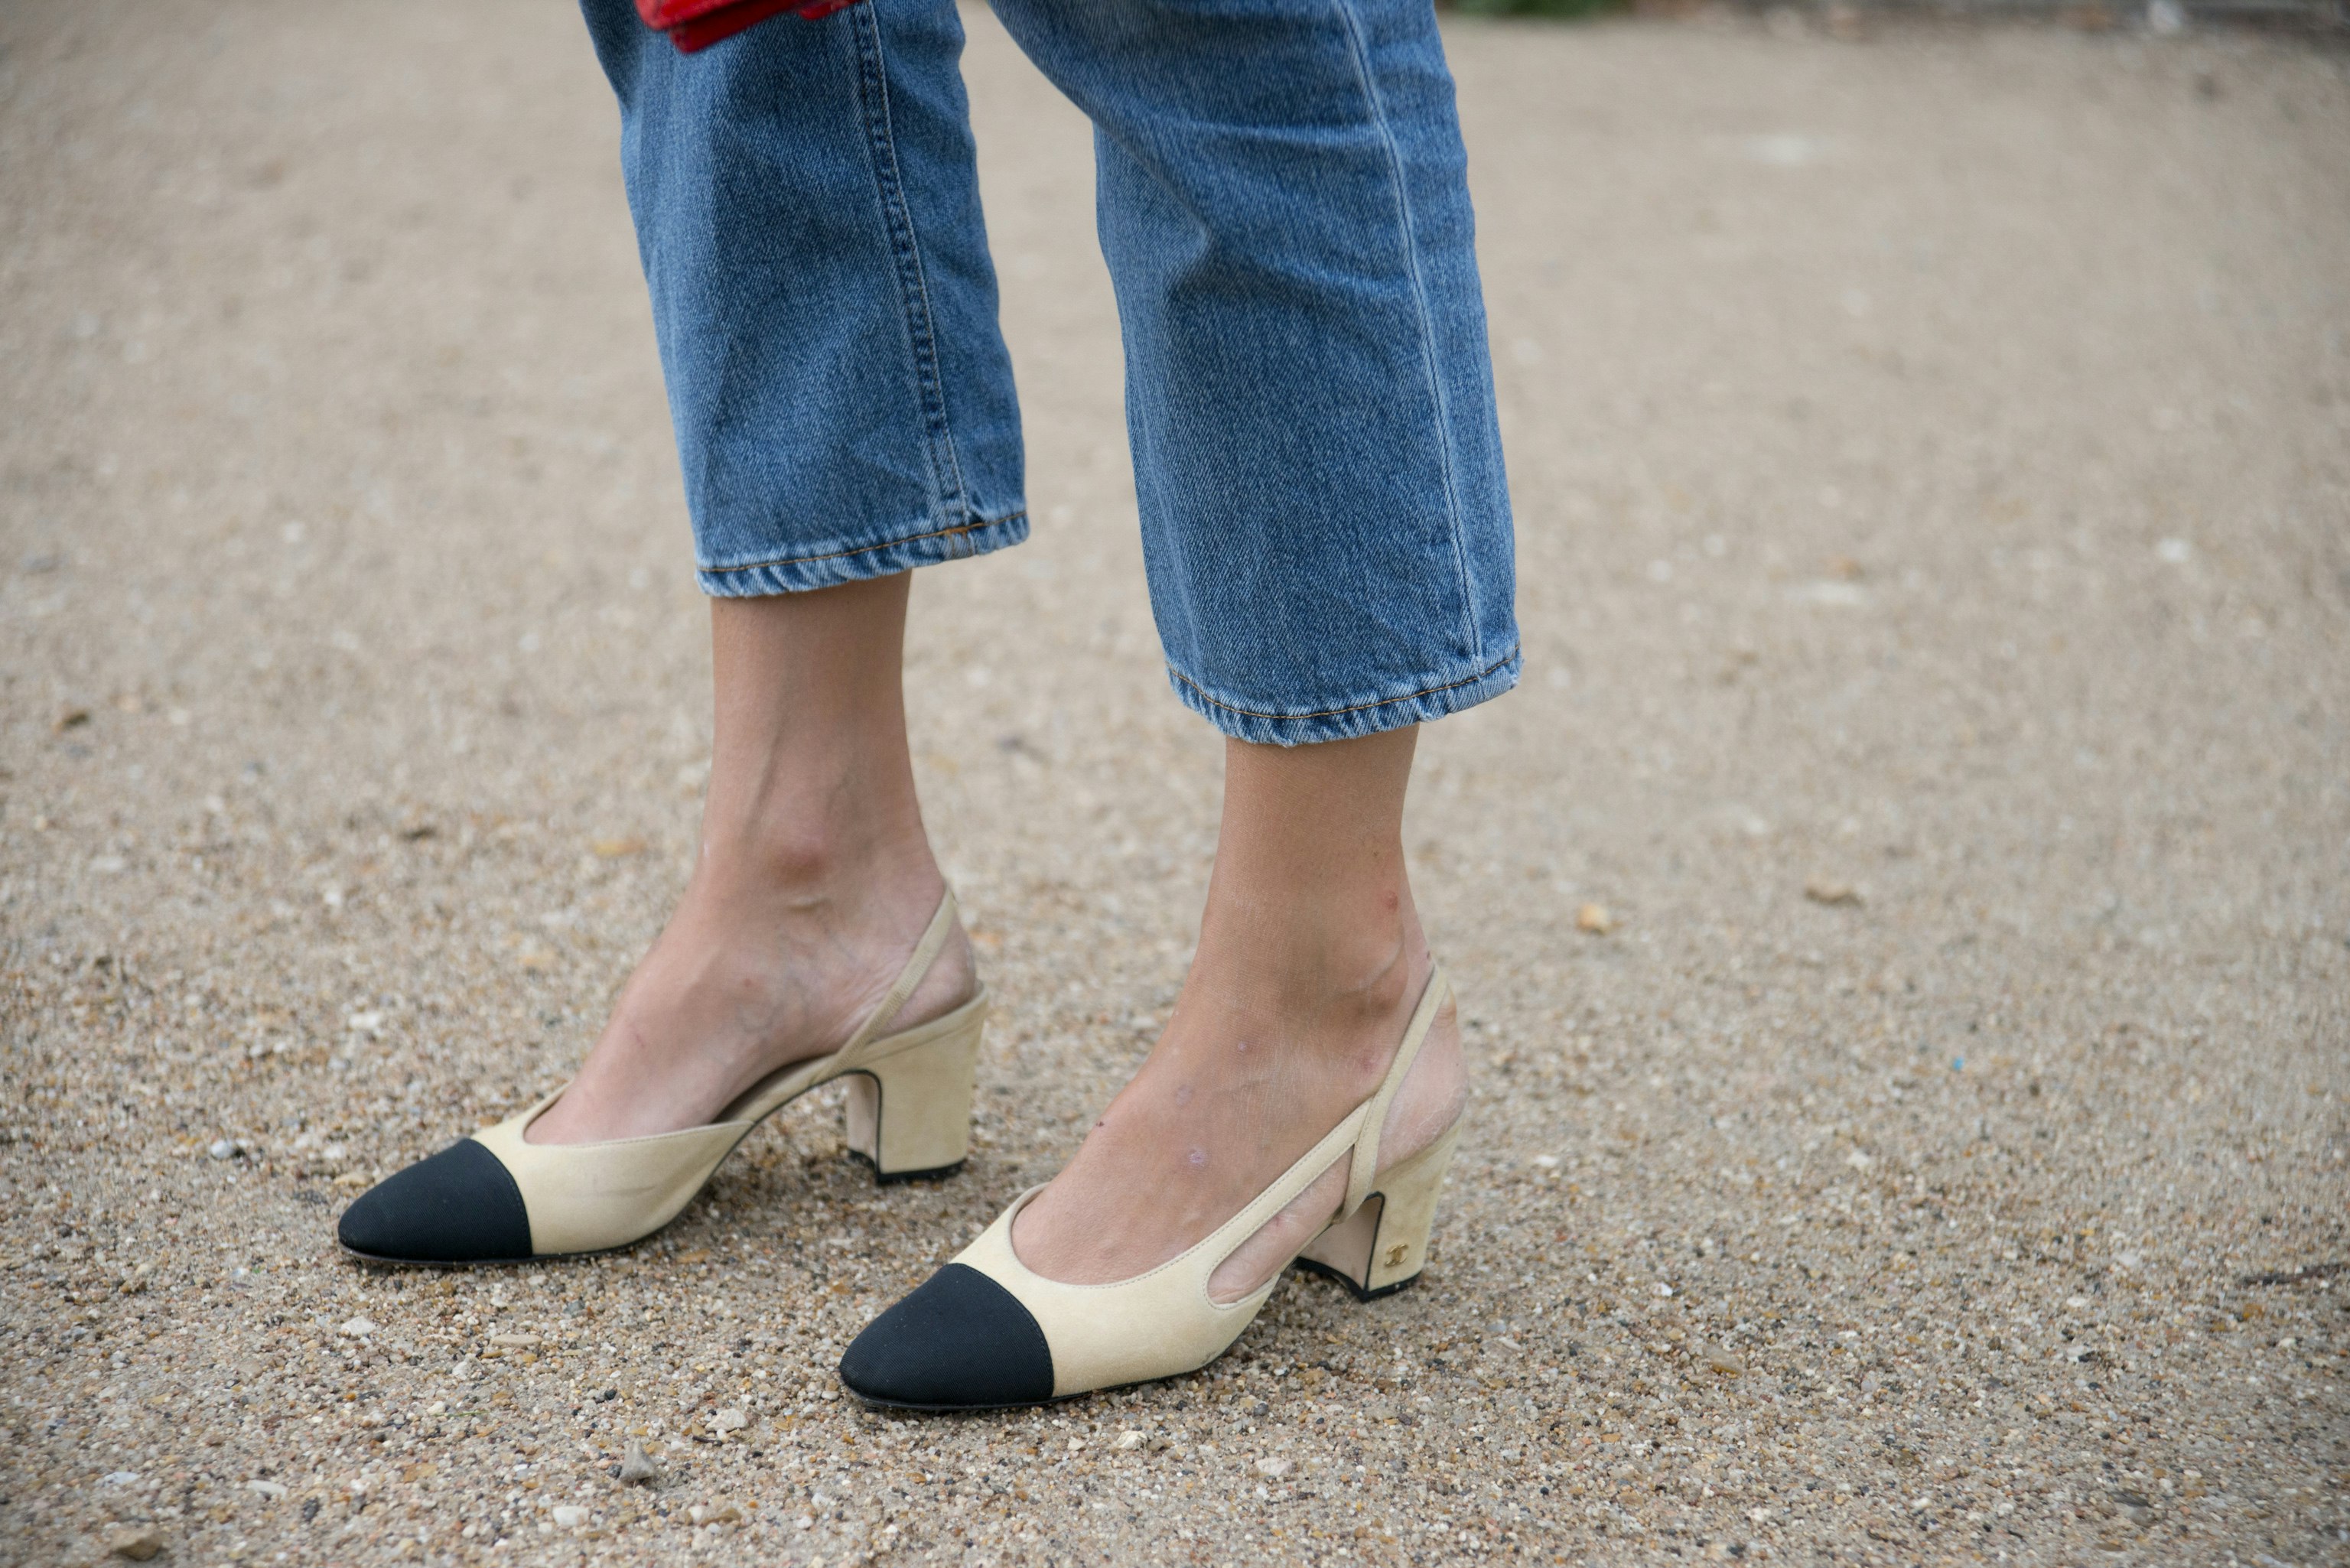 Chanel Slingback Dupes - Casual Look